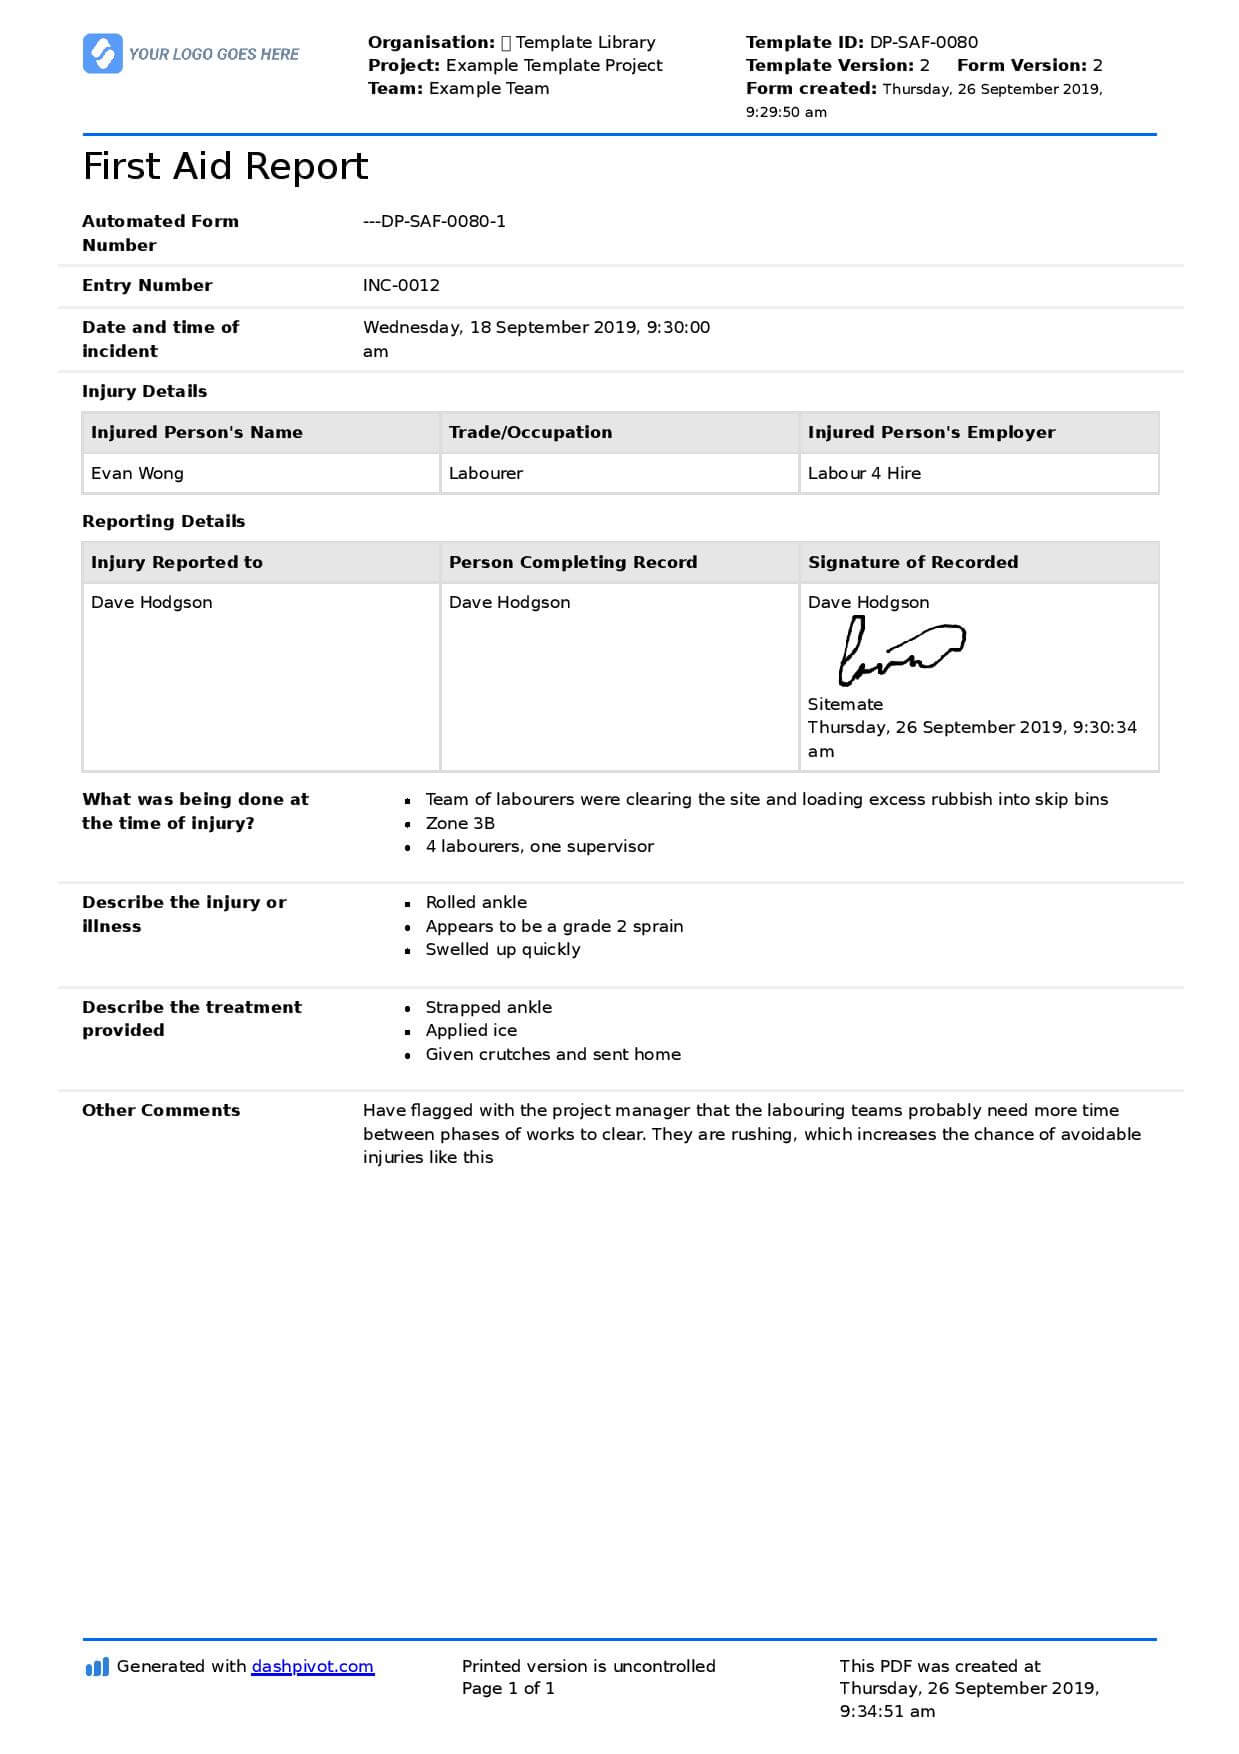 First Aid Incident Form In Incident Report Template Uk